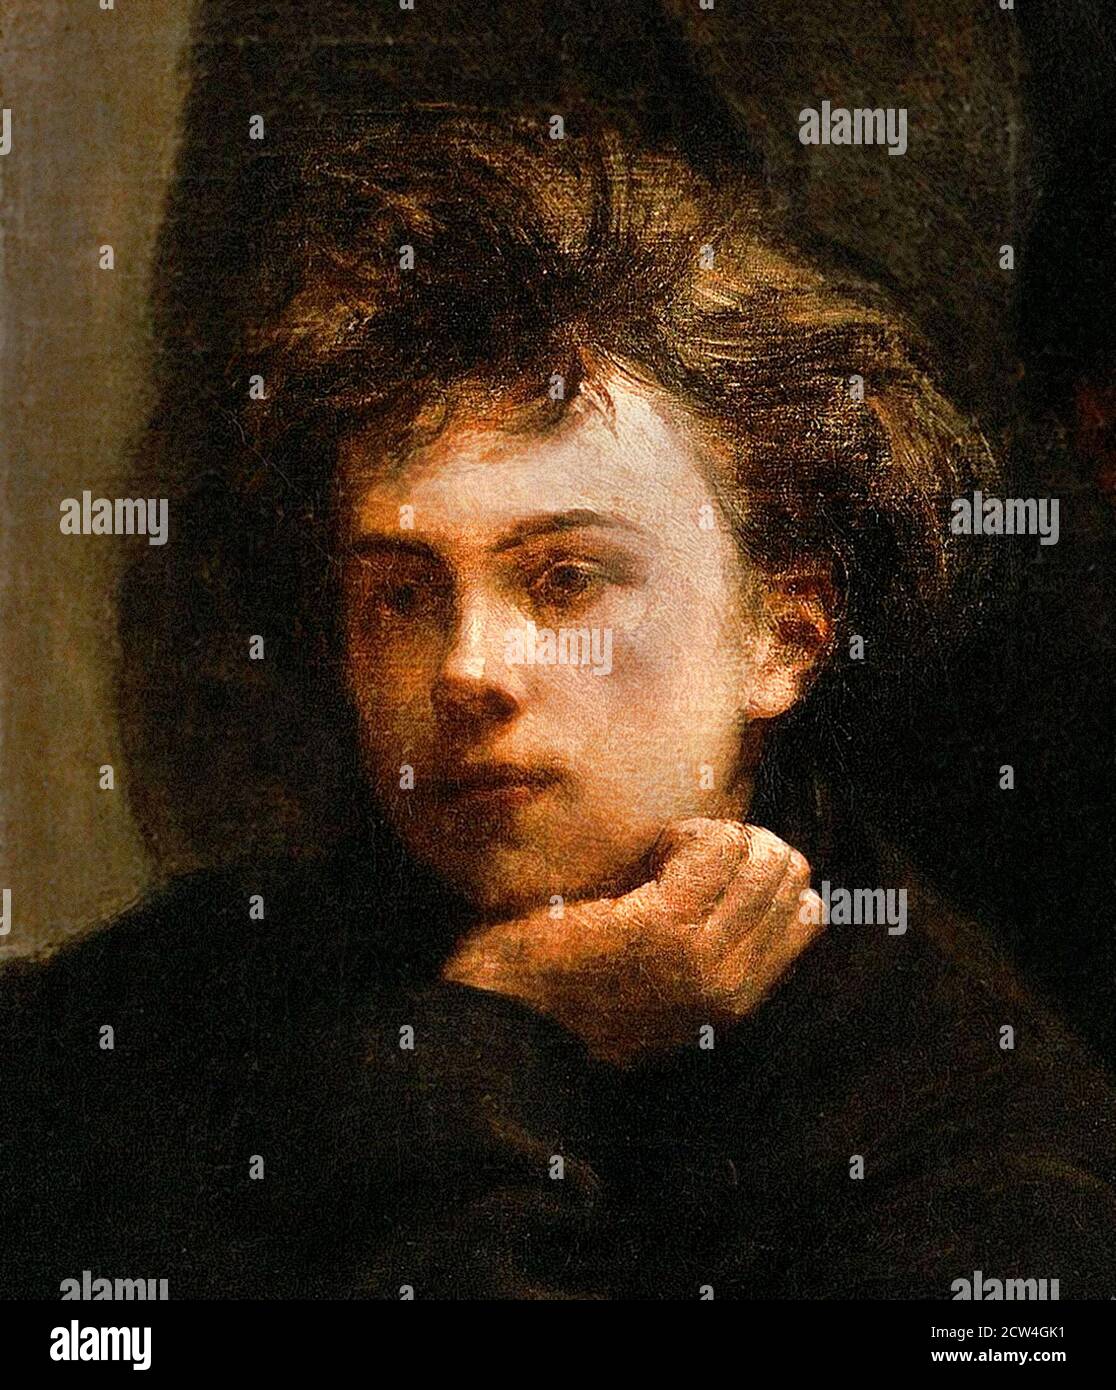 Arthur Rimbaud. Portrait of the French poet, Jean Nicolas Arthur Rimbaud (1854-1891), aged about 18, by Henri Fantin-Latour, oil on canvas, 1872. Detail from a larger painting 'Coin de Table'. Stock Photo